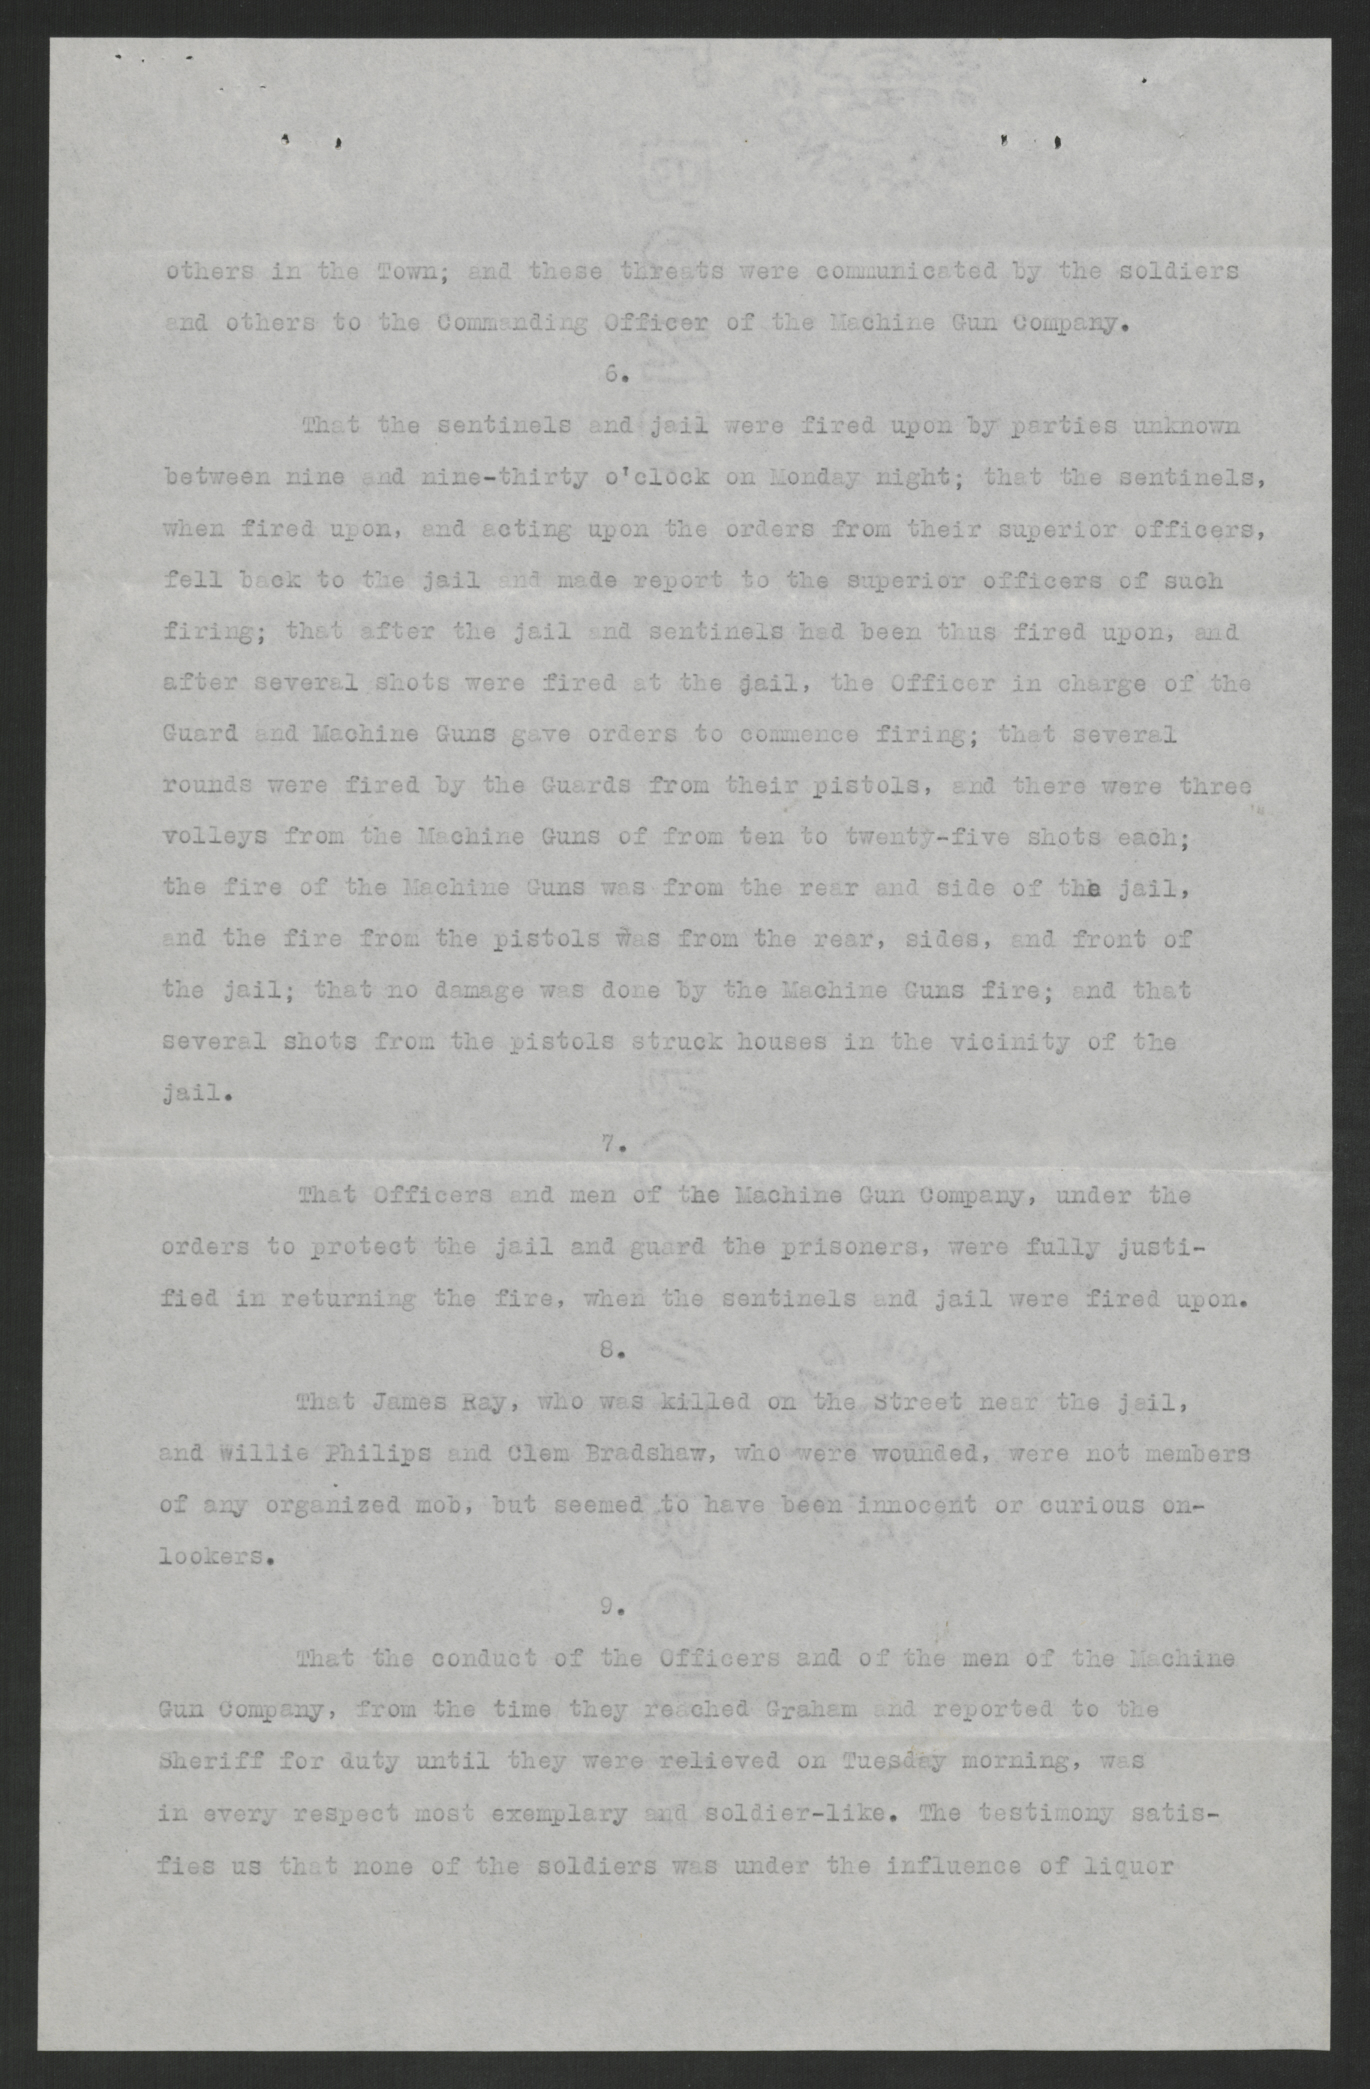 Report of the Investigative Committee on its Findings of the Attempted Lynching at Graham, August 16, 1920, page 3